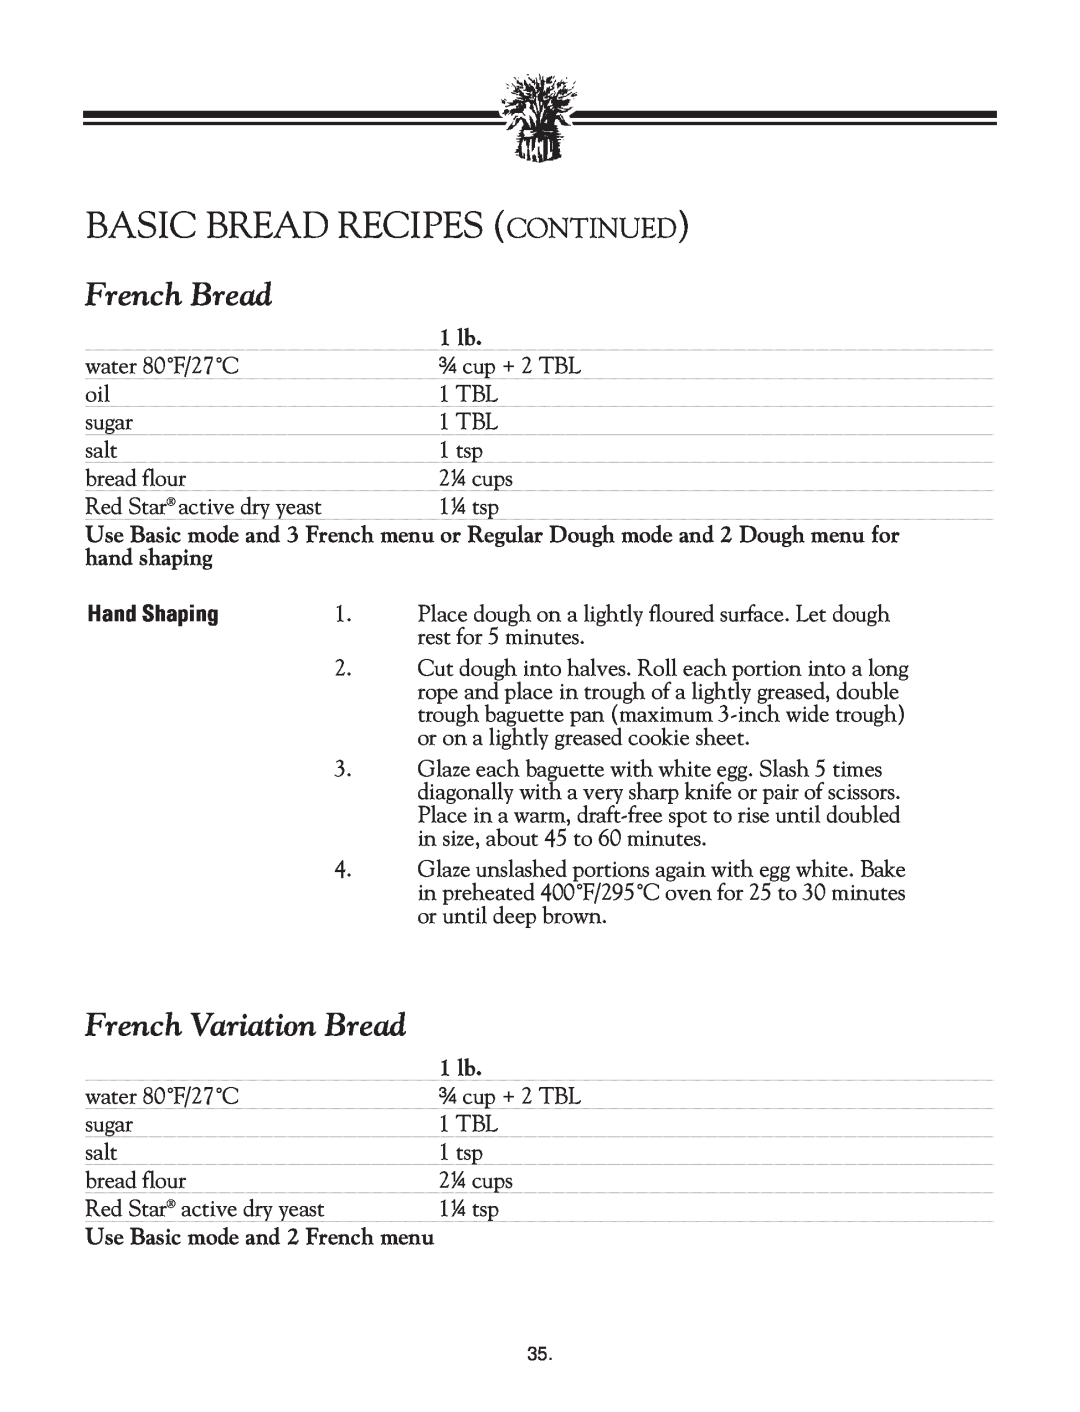 Breadman TR2828G instruction manual French Bread, French Variation Bread, Hand Shaping, Basic Bread Recipes Continued 